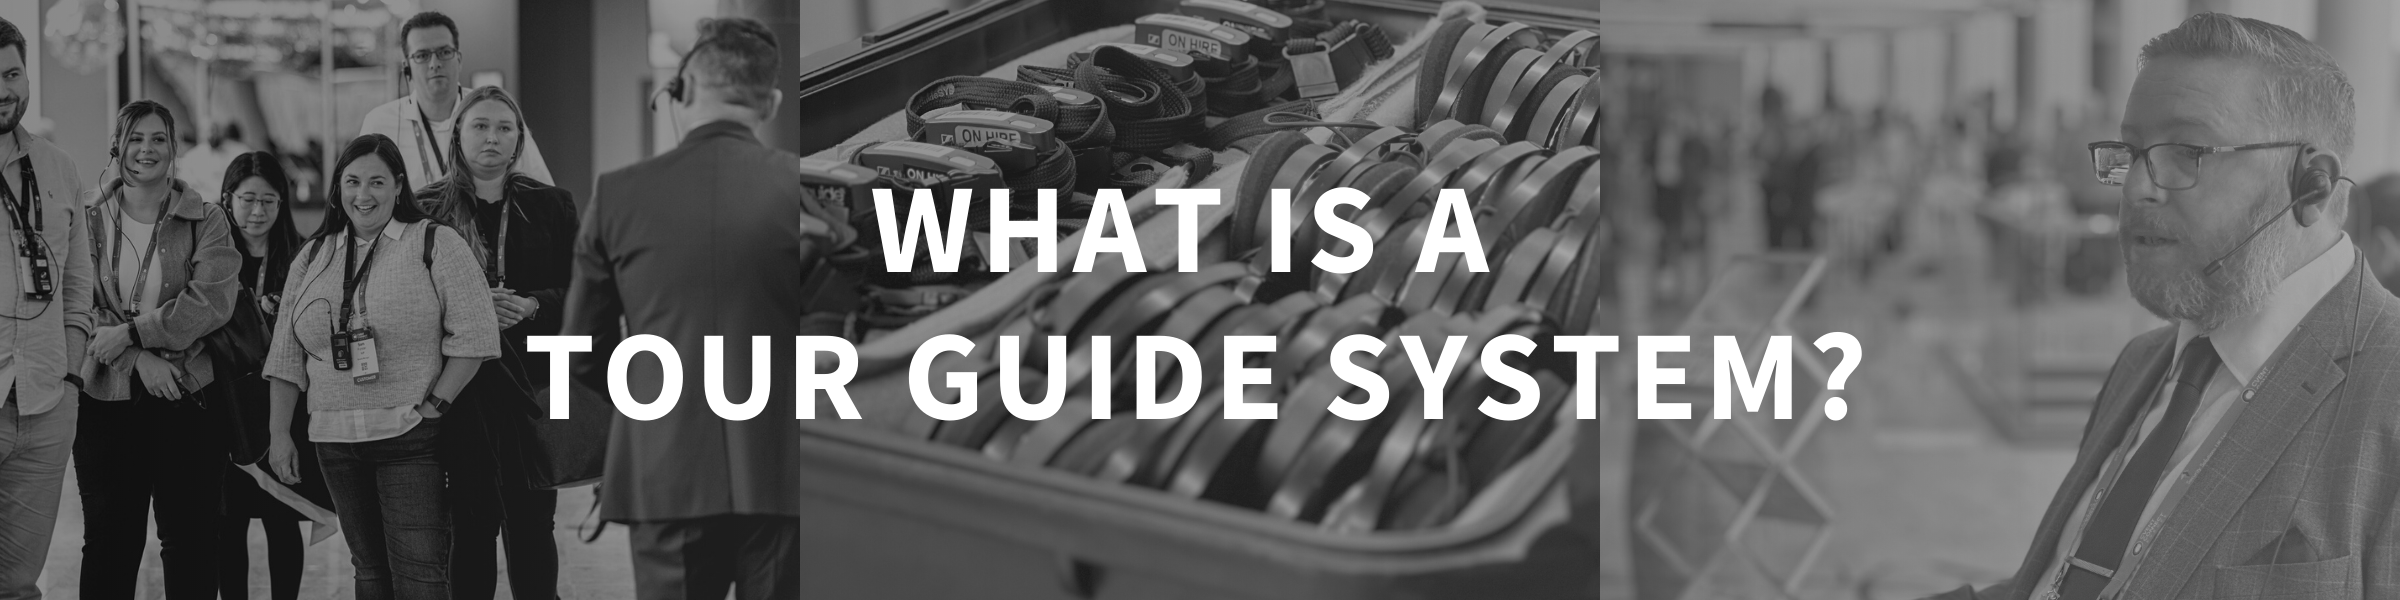 What is a Tour Guide System?